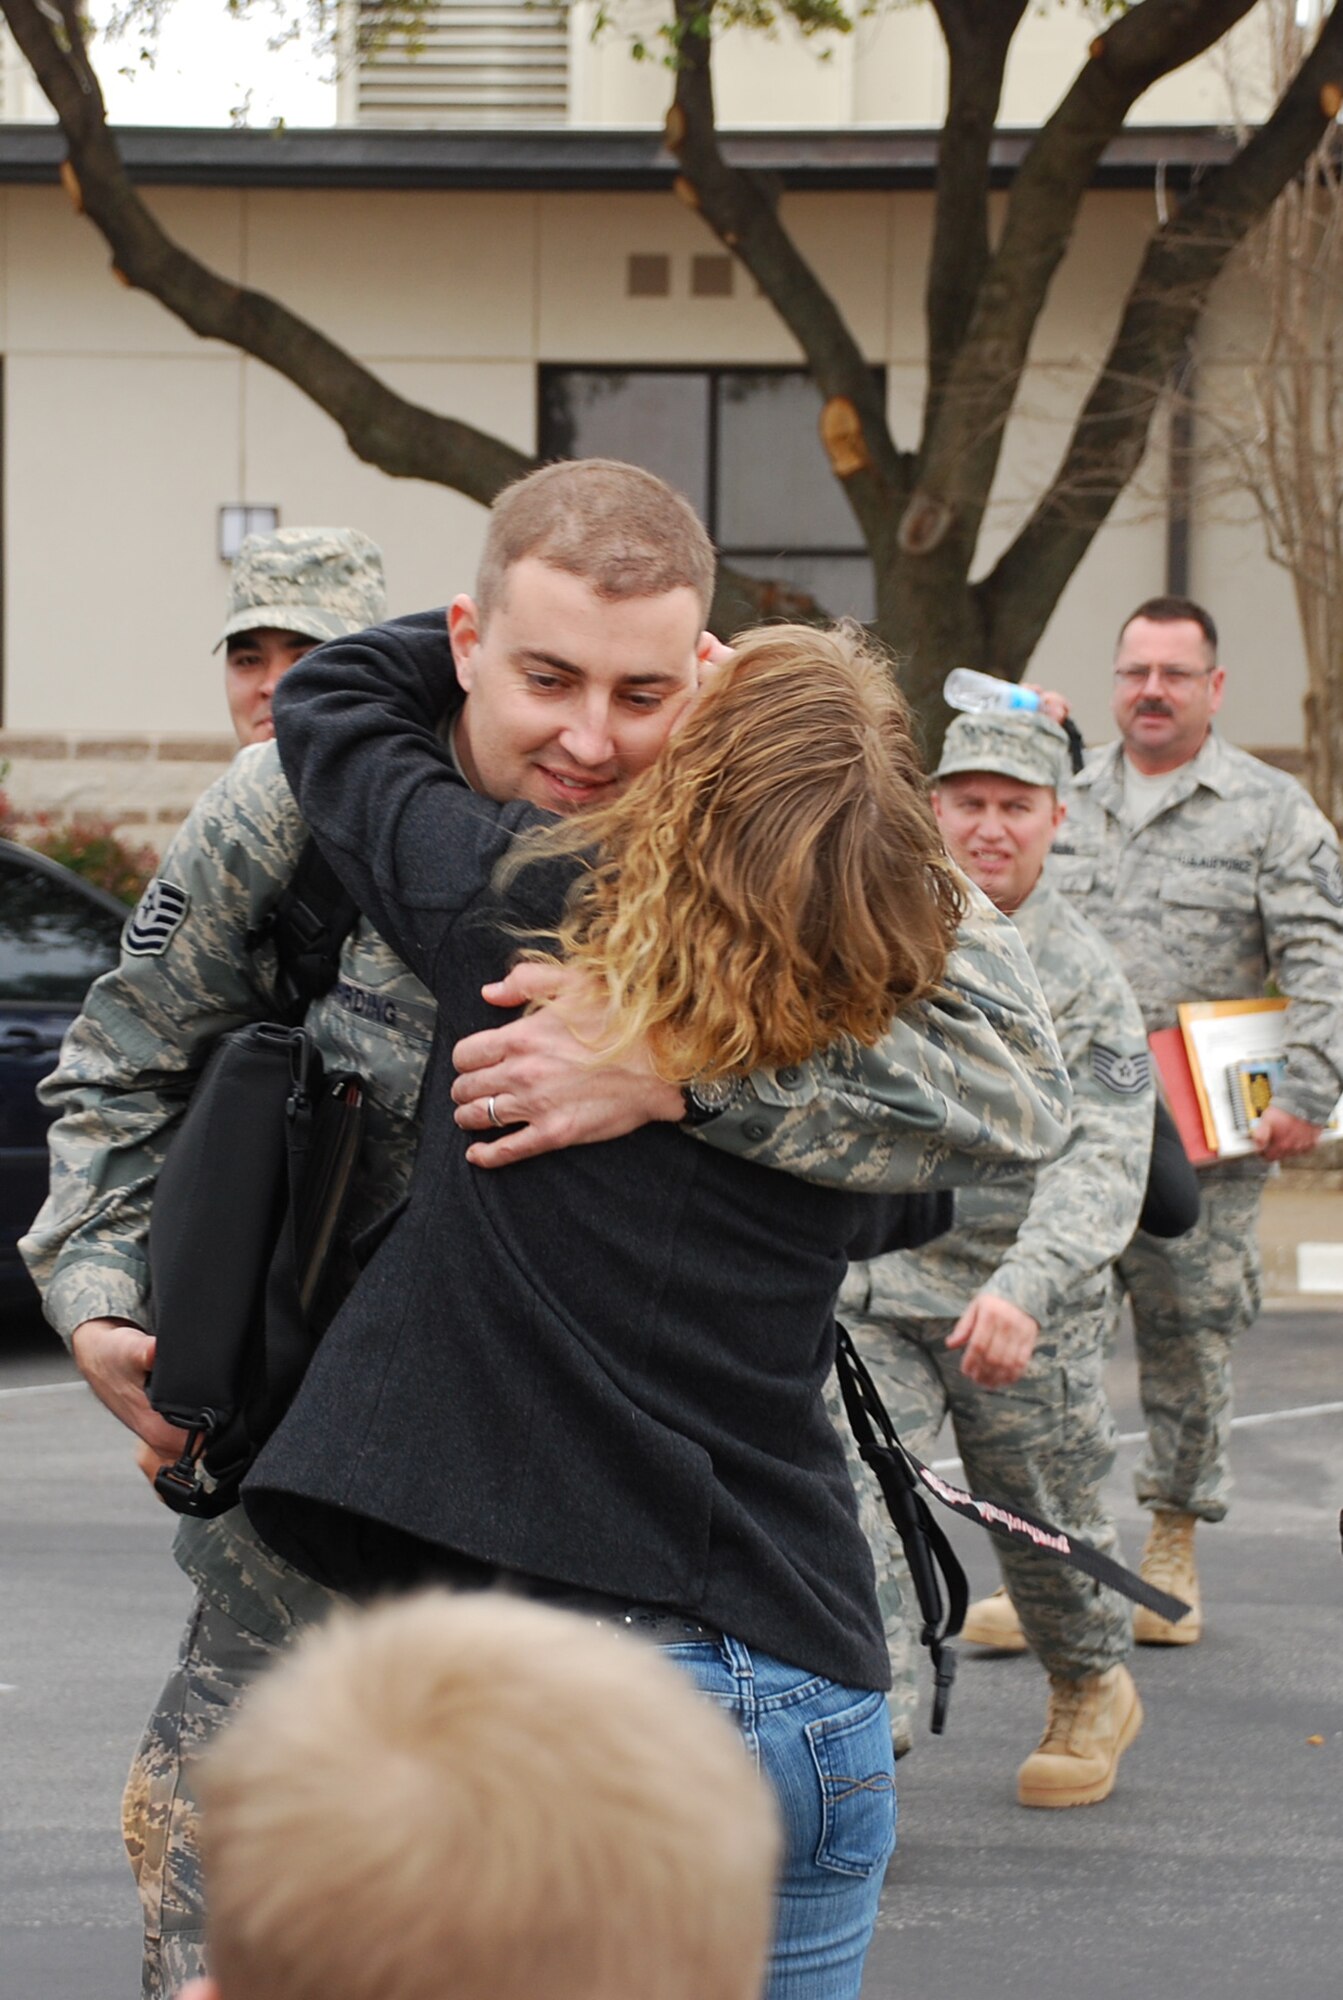 Getting one last hug, one of more than 100 301st Fighter Wing members prepare to board the bus that took them to the awaiting contract aircraft. The troops have deployed in support of Operation Iraqi Freedom and will return in the spring. (U.S. Air Force Photo/Tech. Sgt. Julie Briden-Garcia)